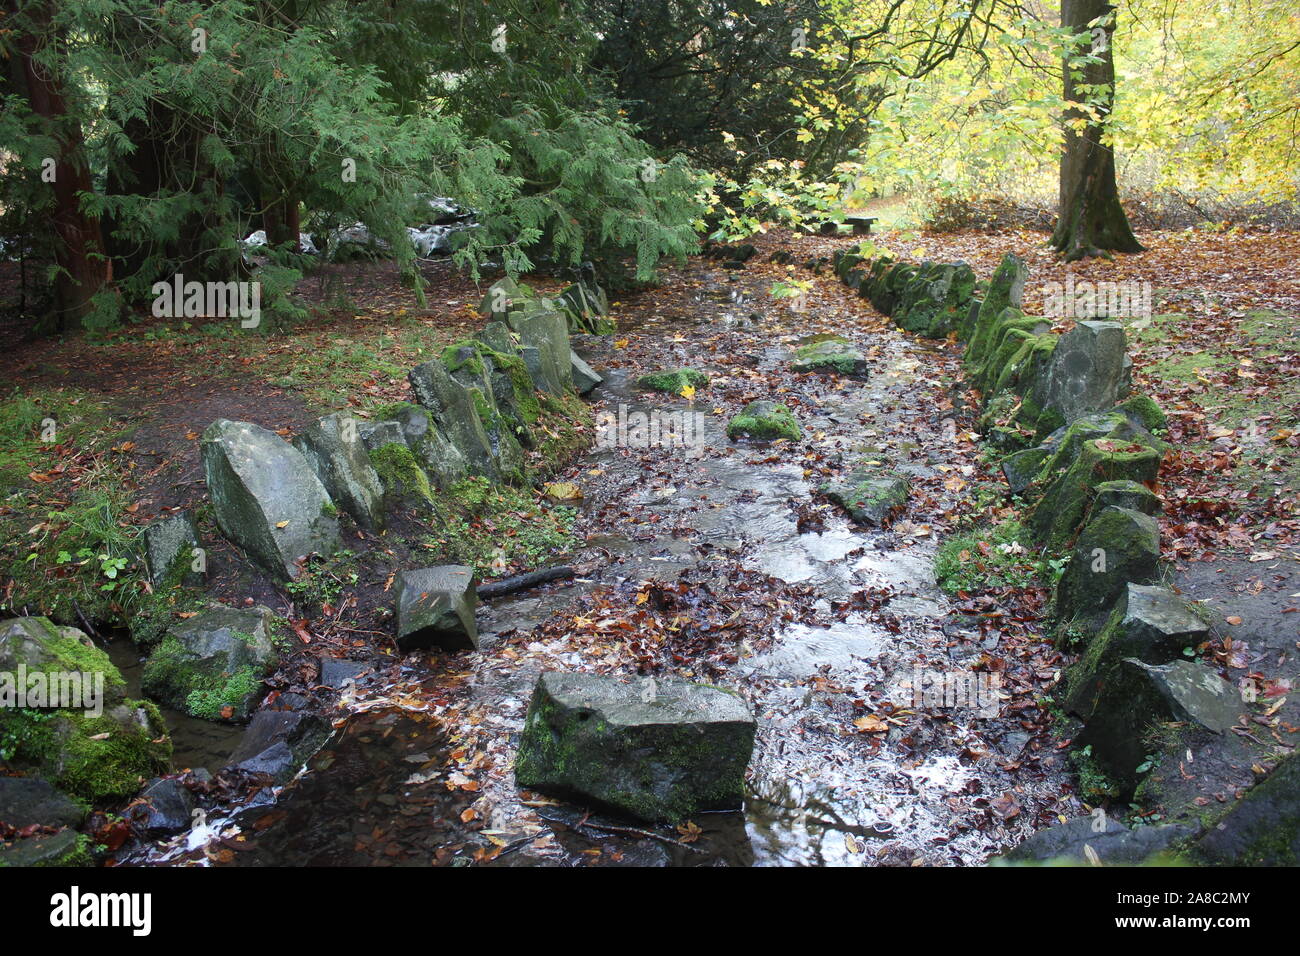 Autumn scene. Small creek with low water, borderd by natural primeval rocks. Stock Photo